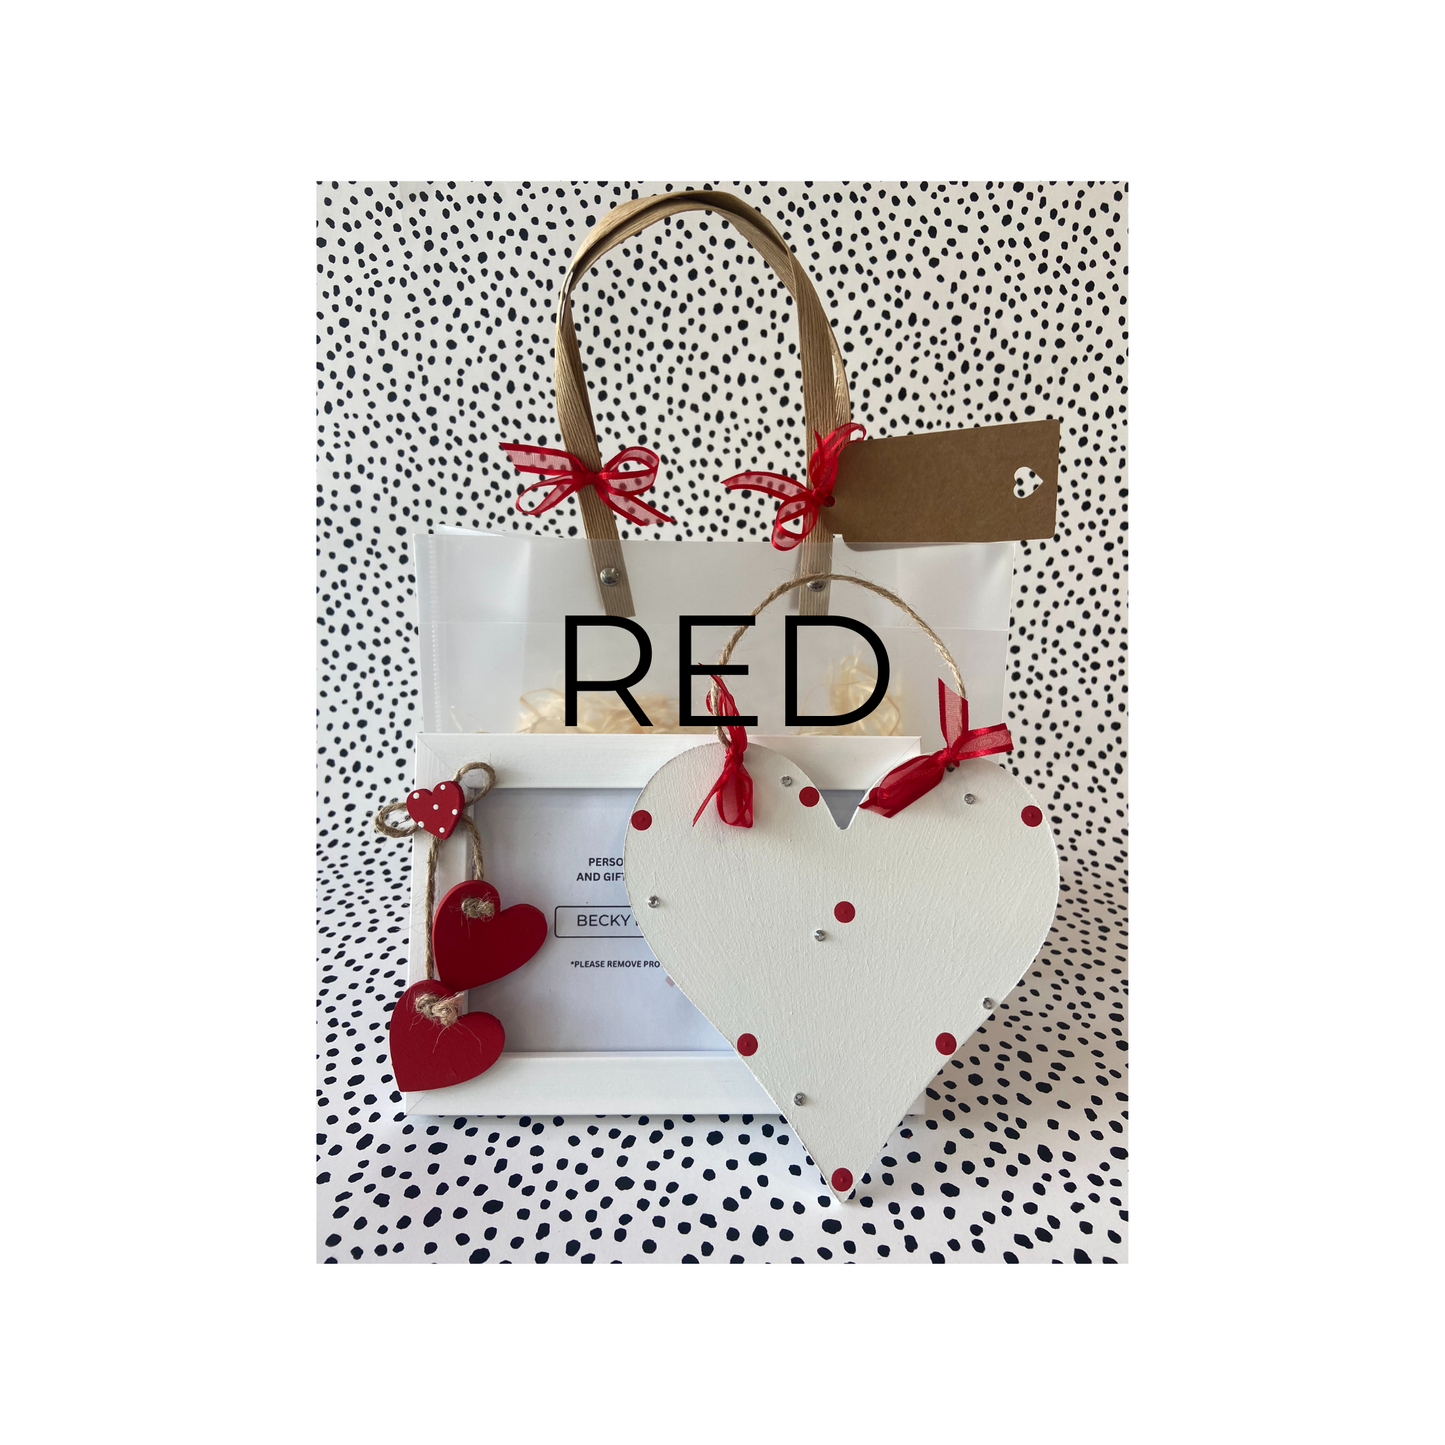 Image shows example of a red gift set